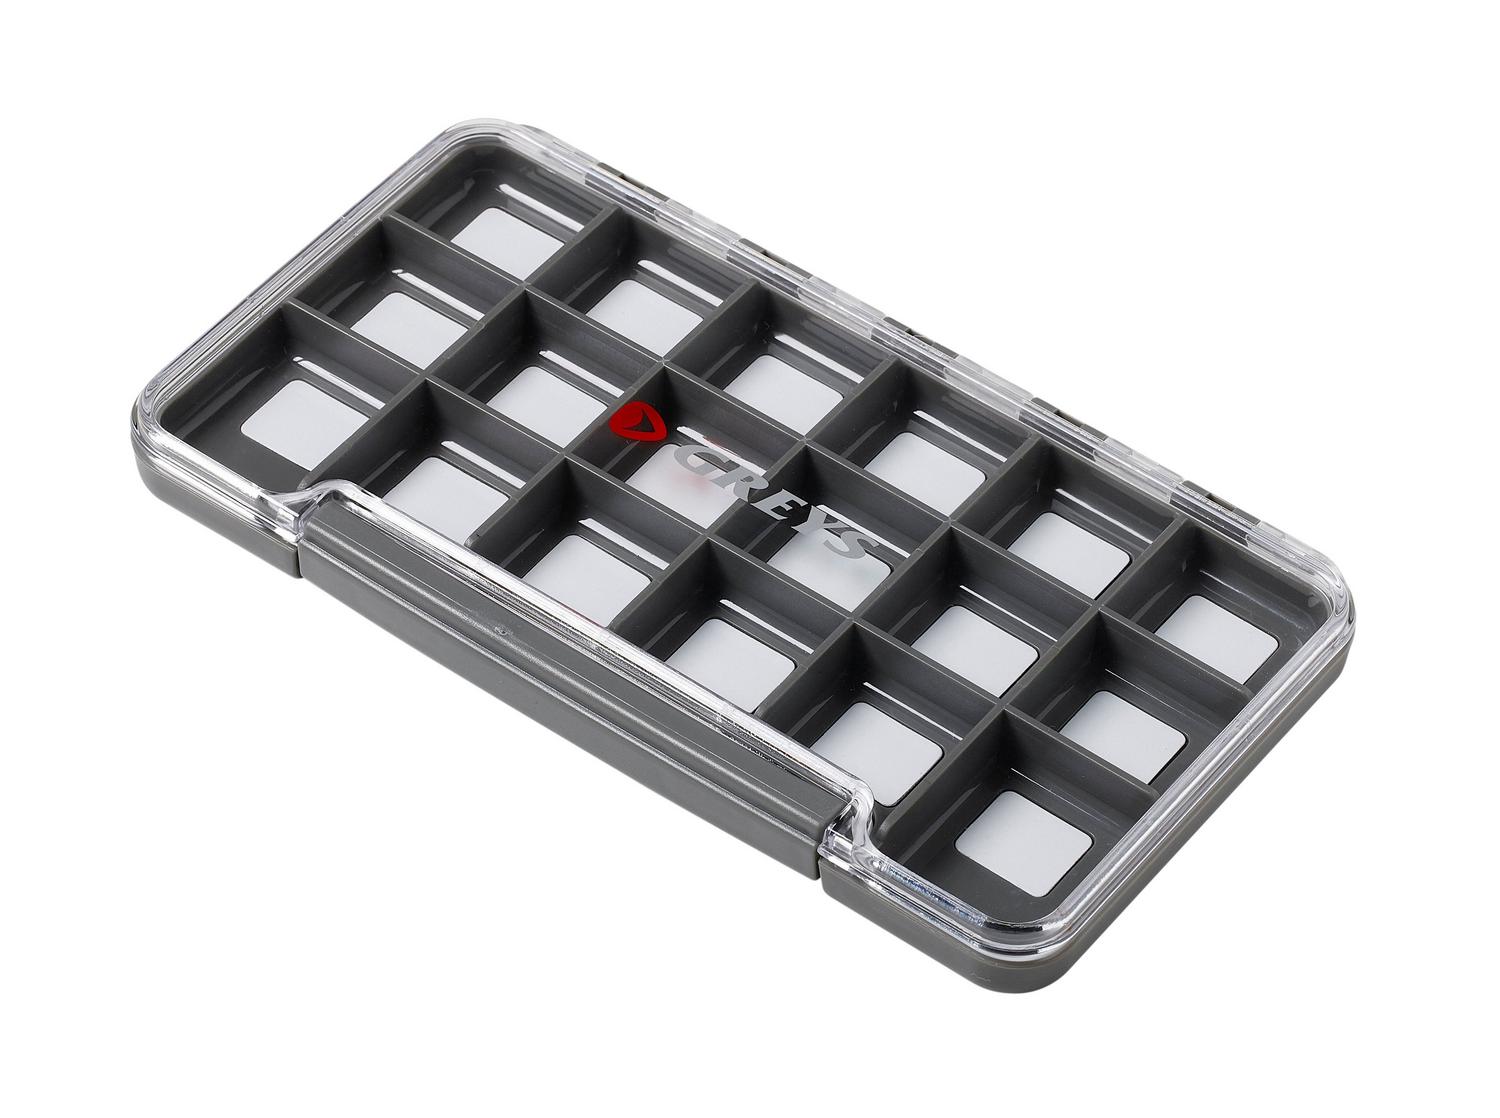 GREYS SLIM WATERPROOF FLY BOX - 18 COMPARTMENTS